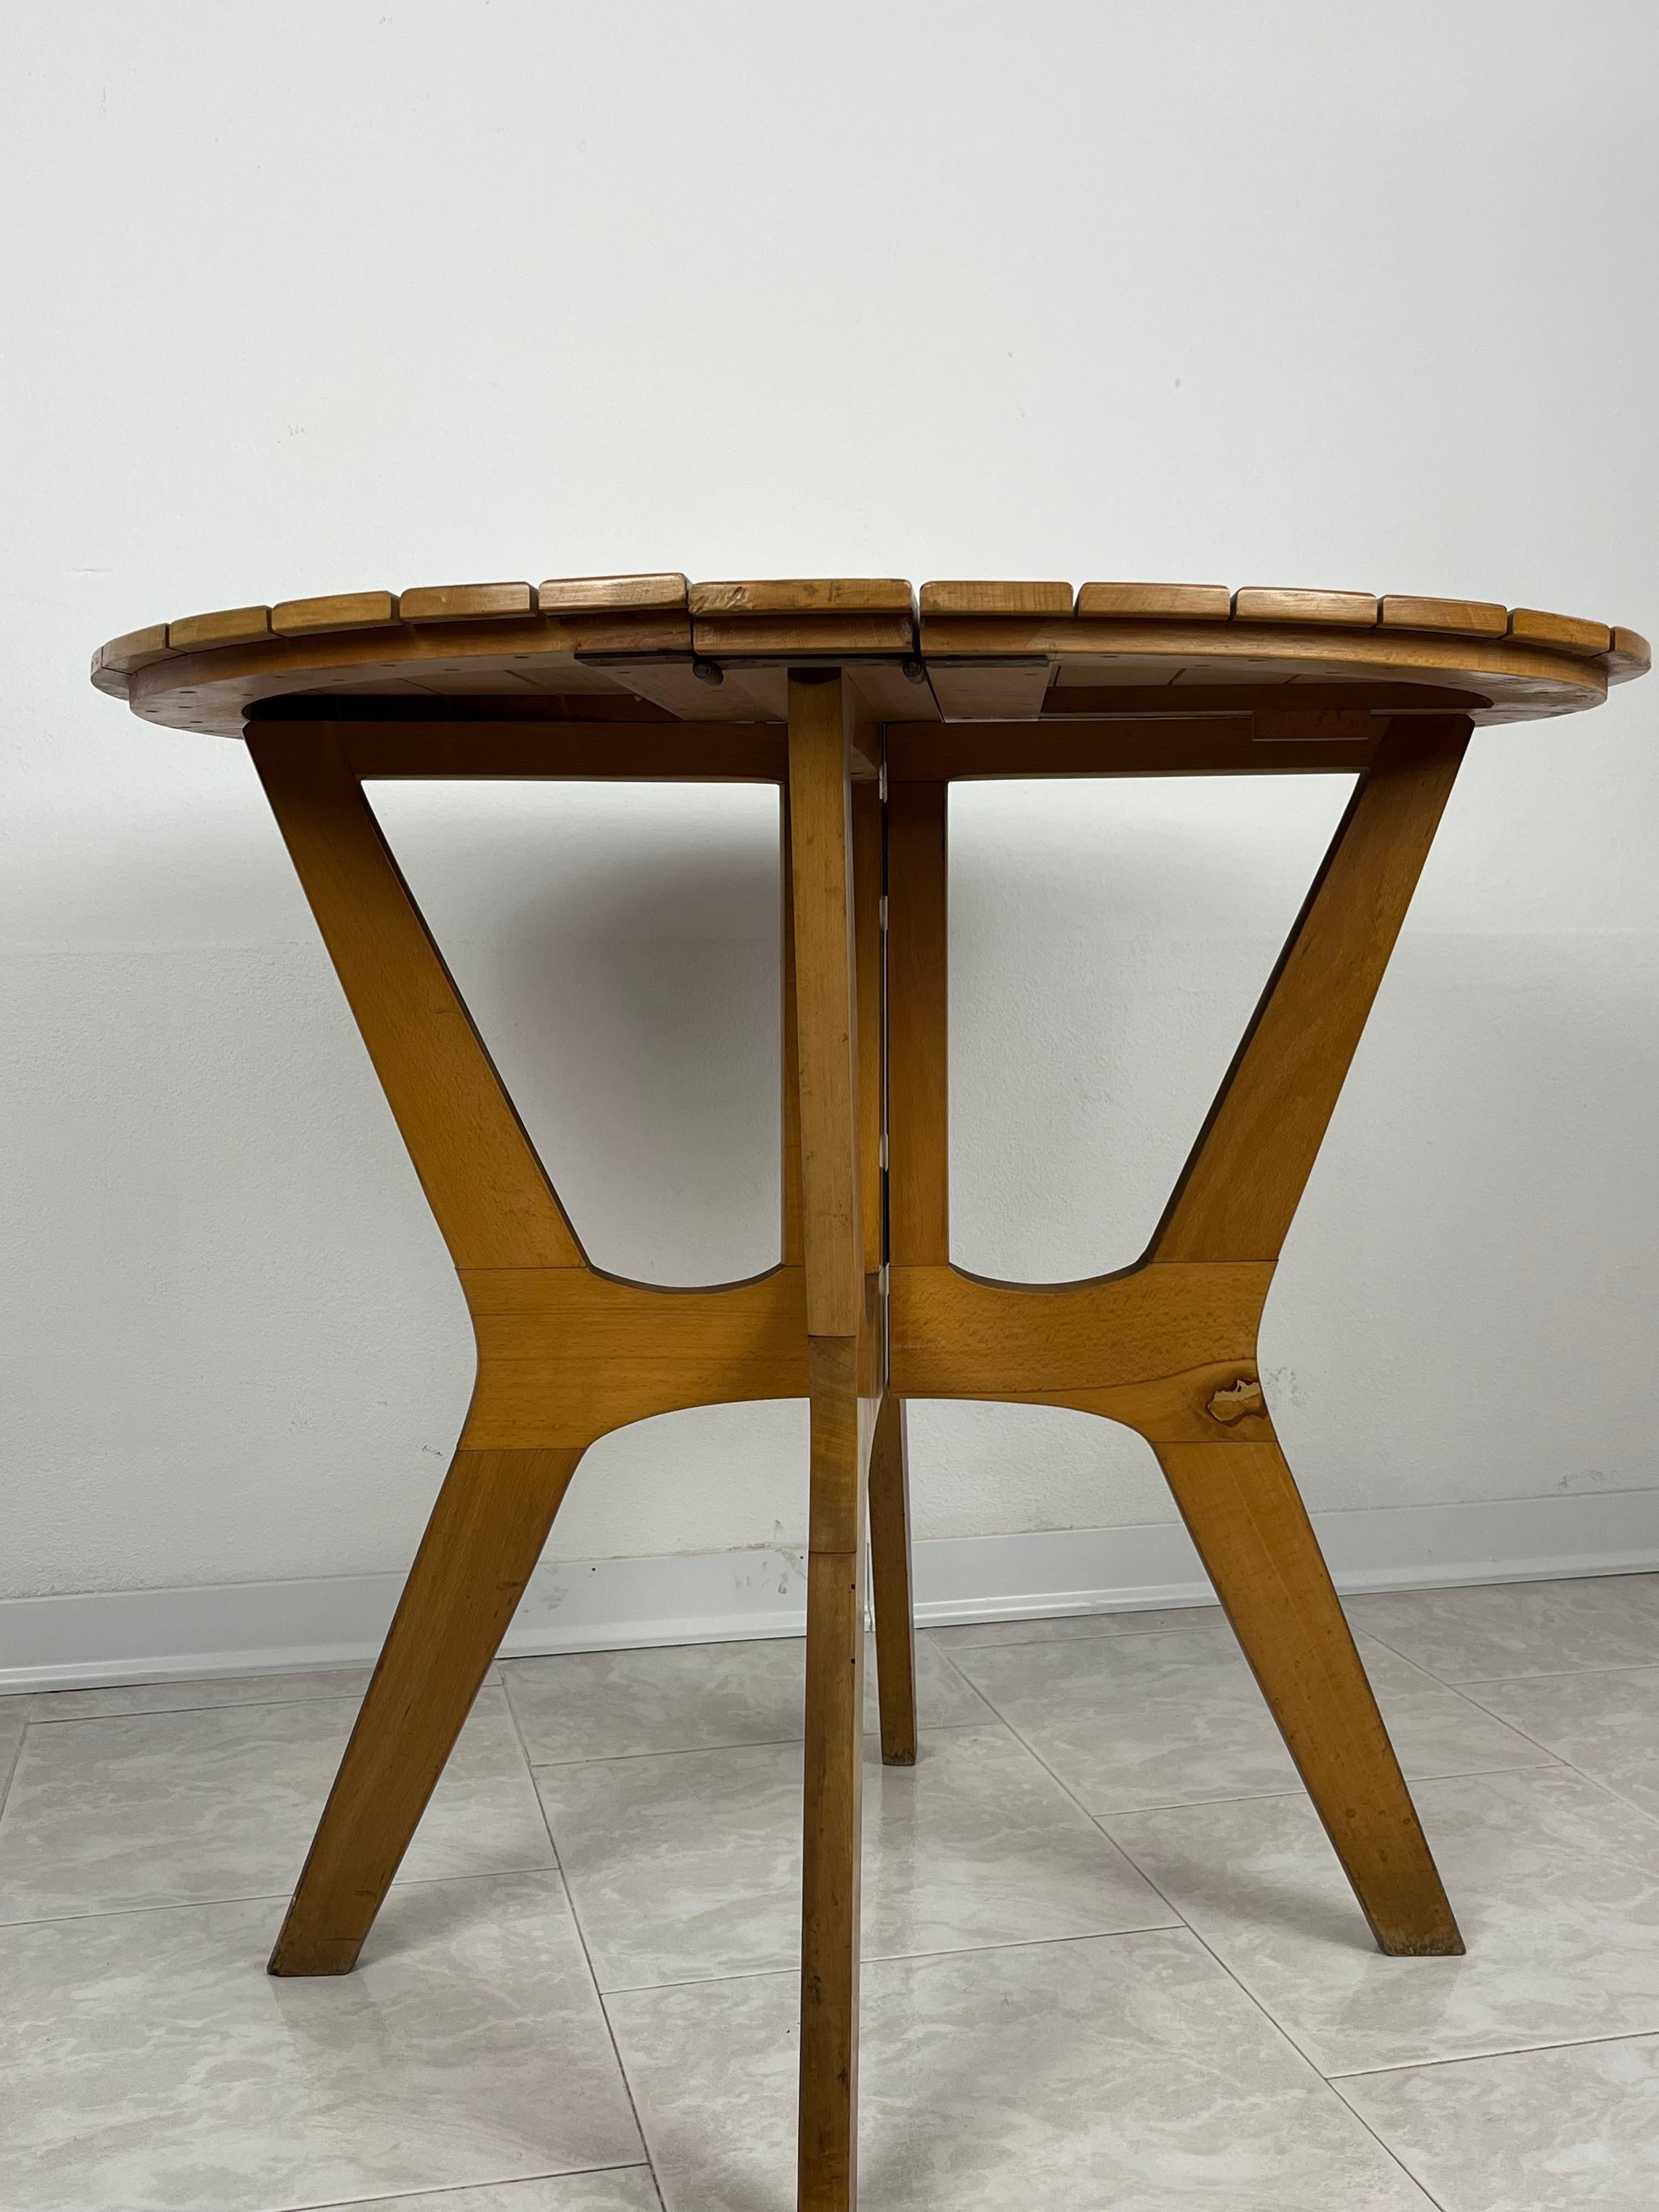 Folding Table in Maple Wood, Fada Asiago, Italy, 1976 For Sale 5